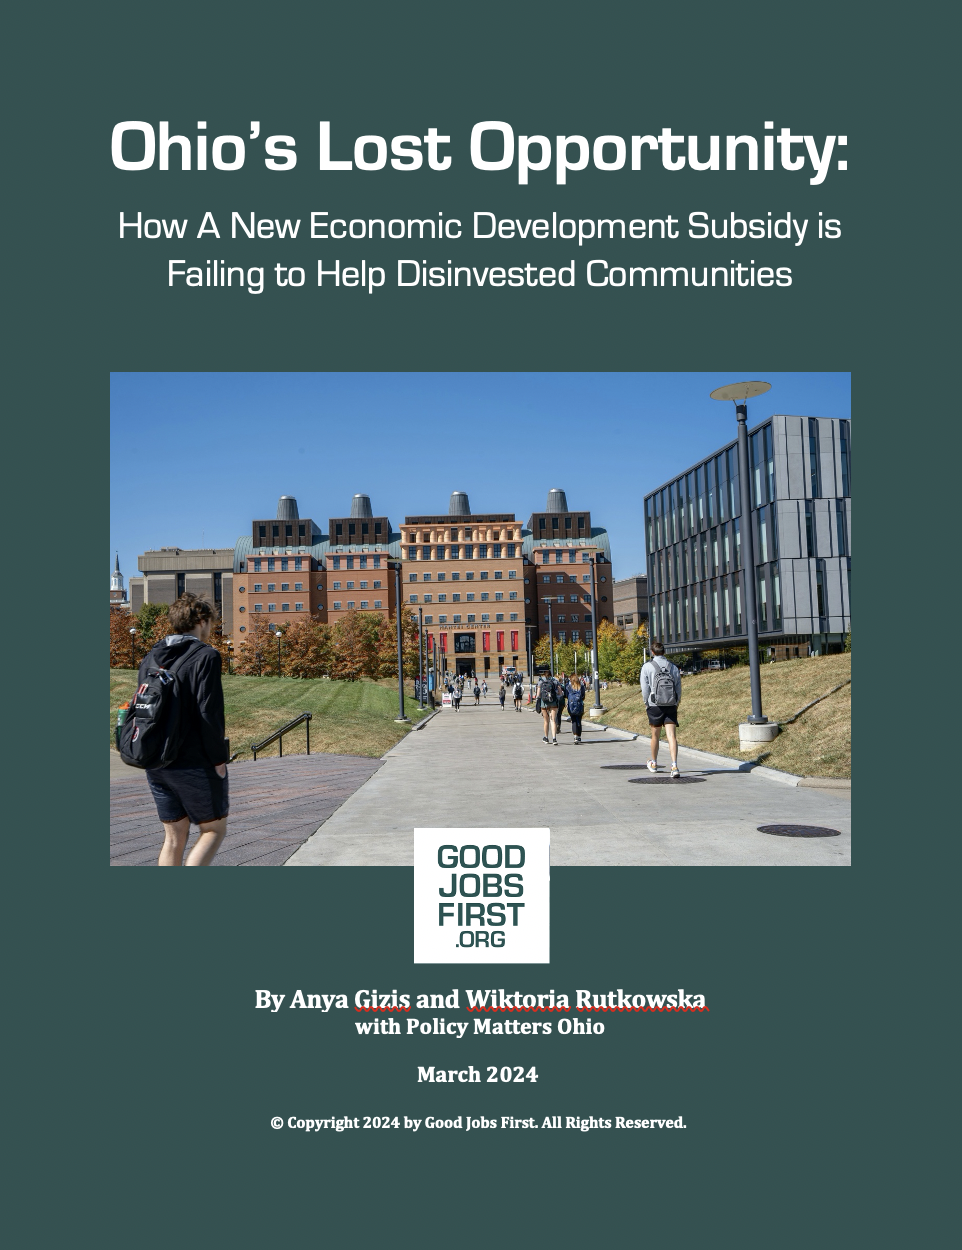 Ohio’s Lost Opportunity: How A New Economic Development Subsidy is Failing to Help Disinvested Communities